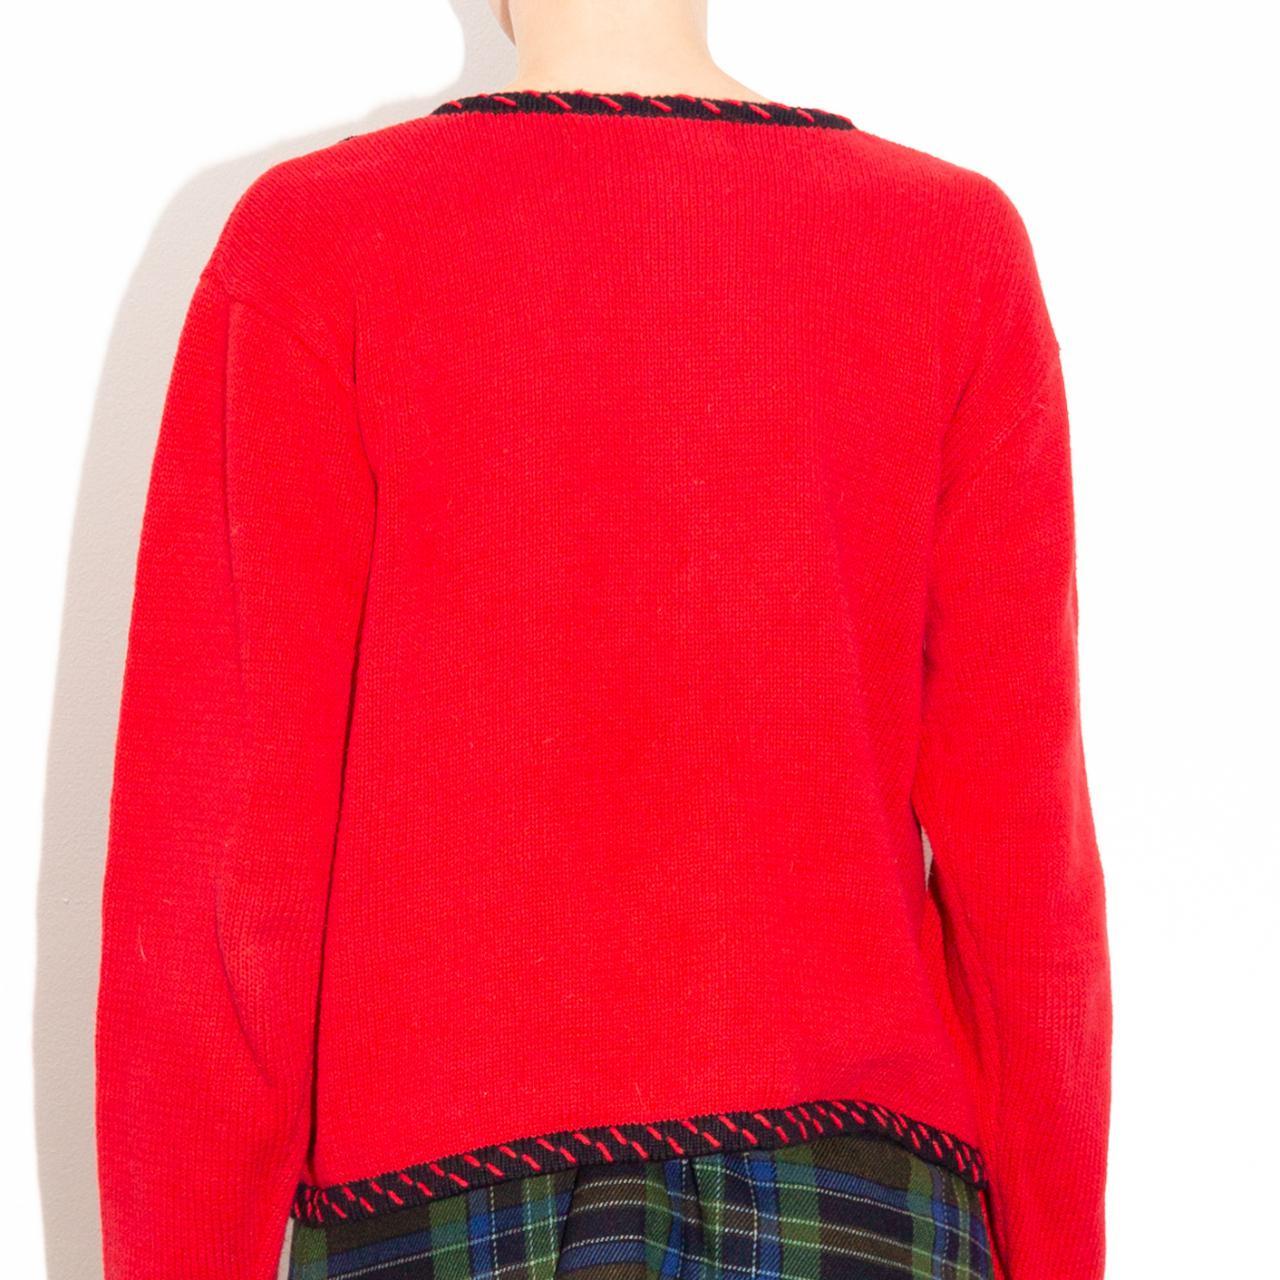 Product Image 4 - Vintage Christmas cardigan sweater with